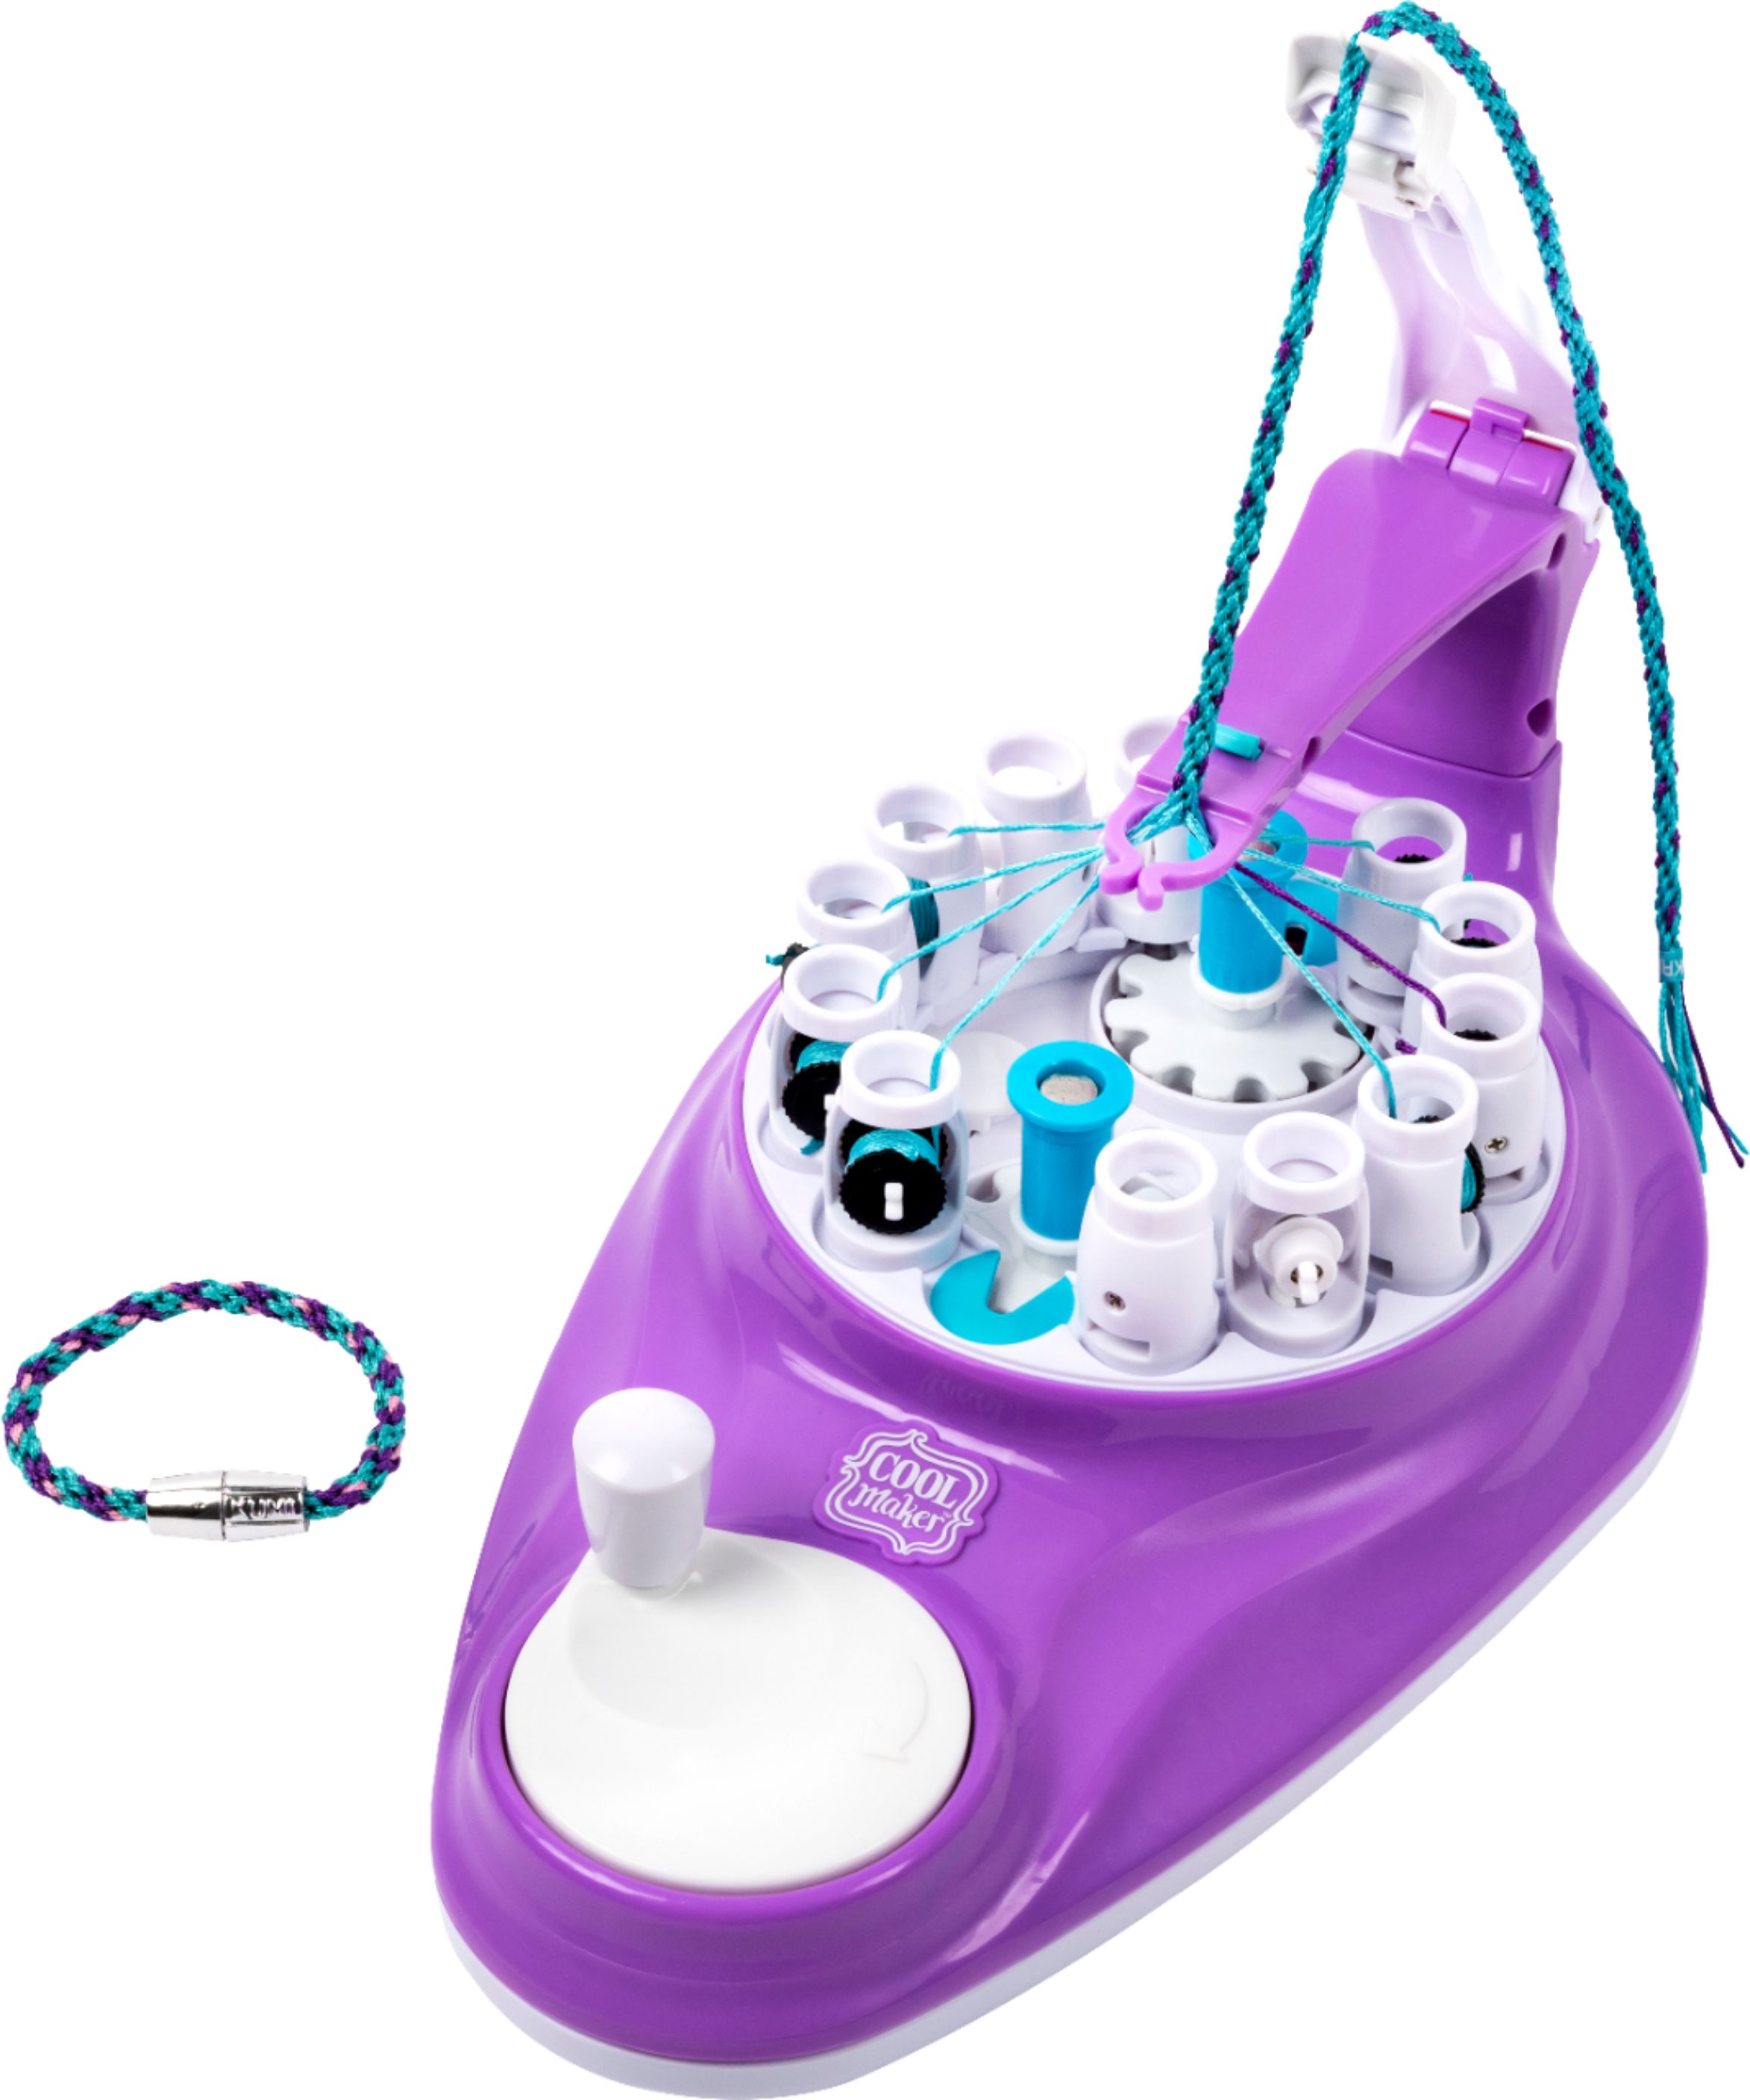 Cool Maker 2-in-1 KumiKreator Necklace and Bracelet  - Best Buy